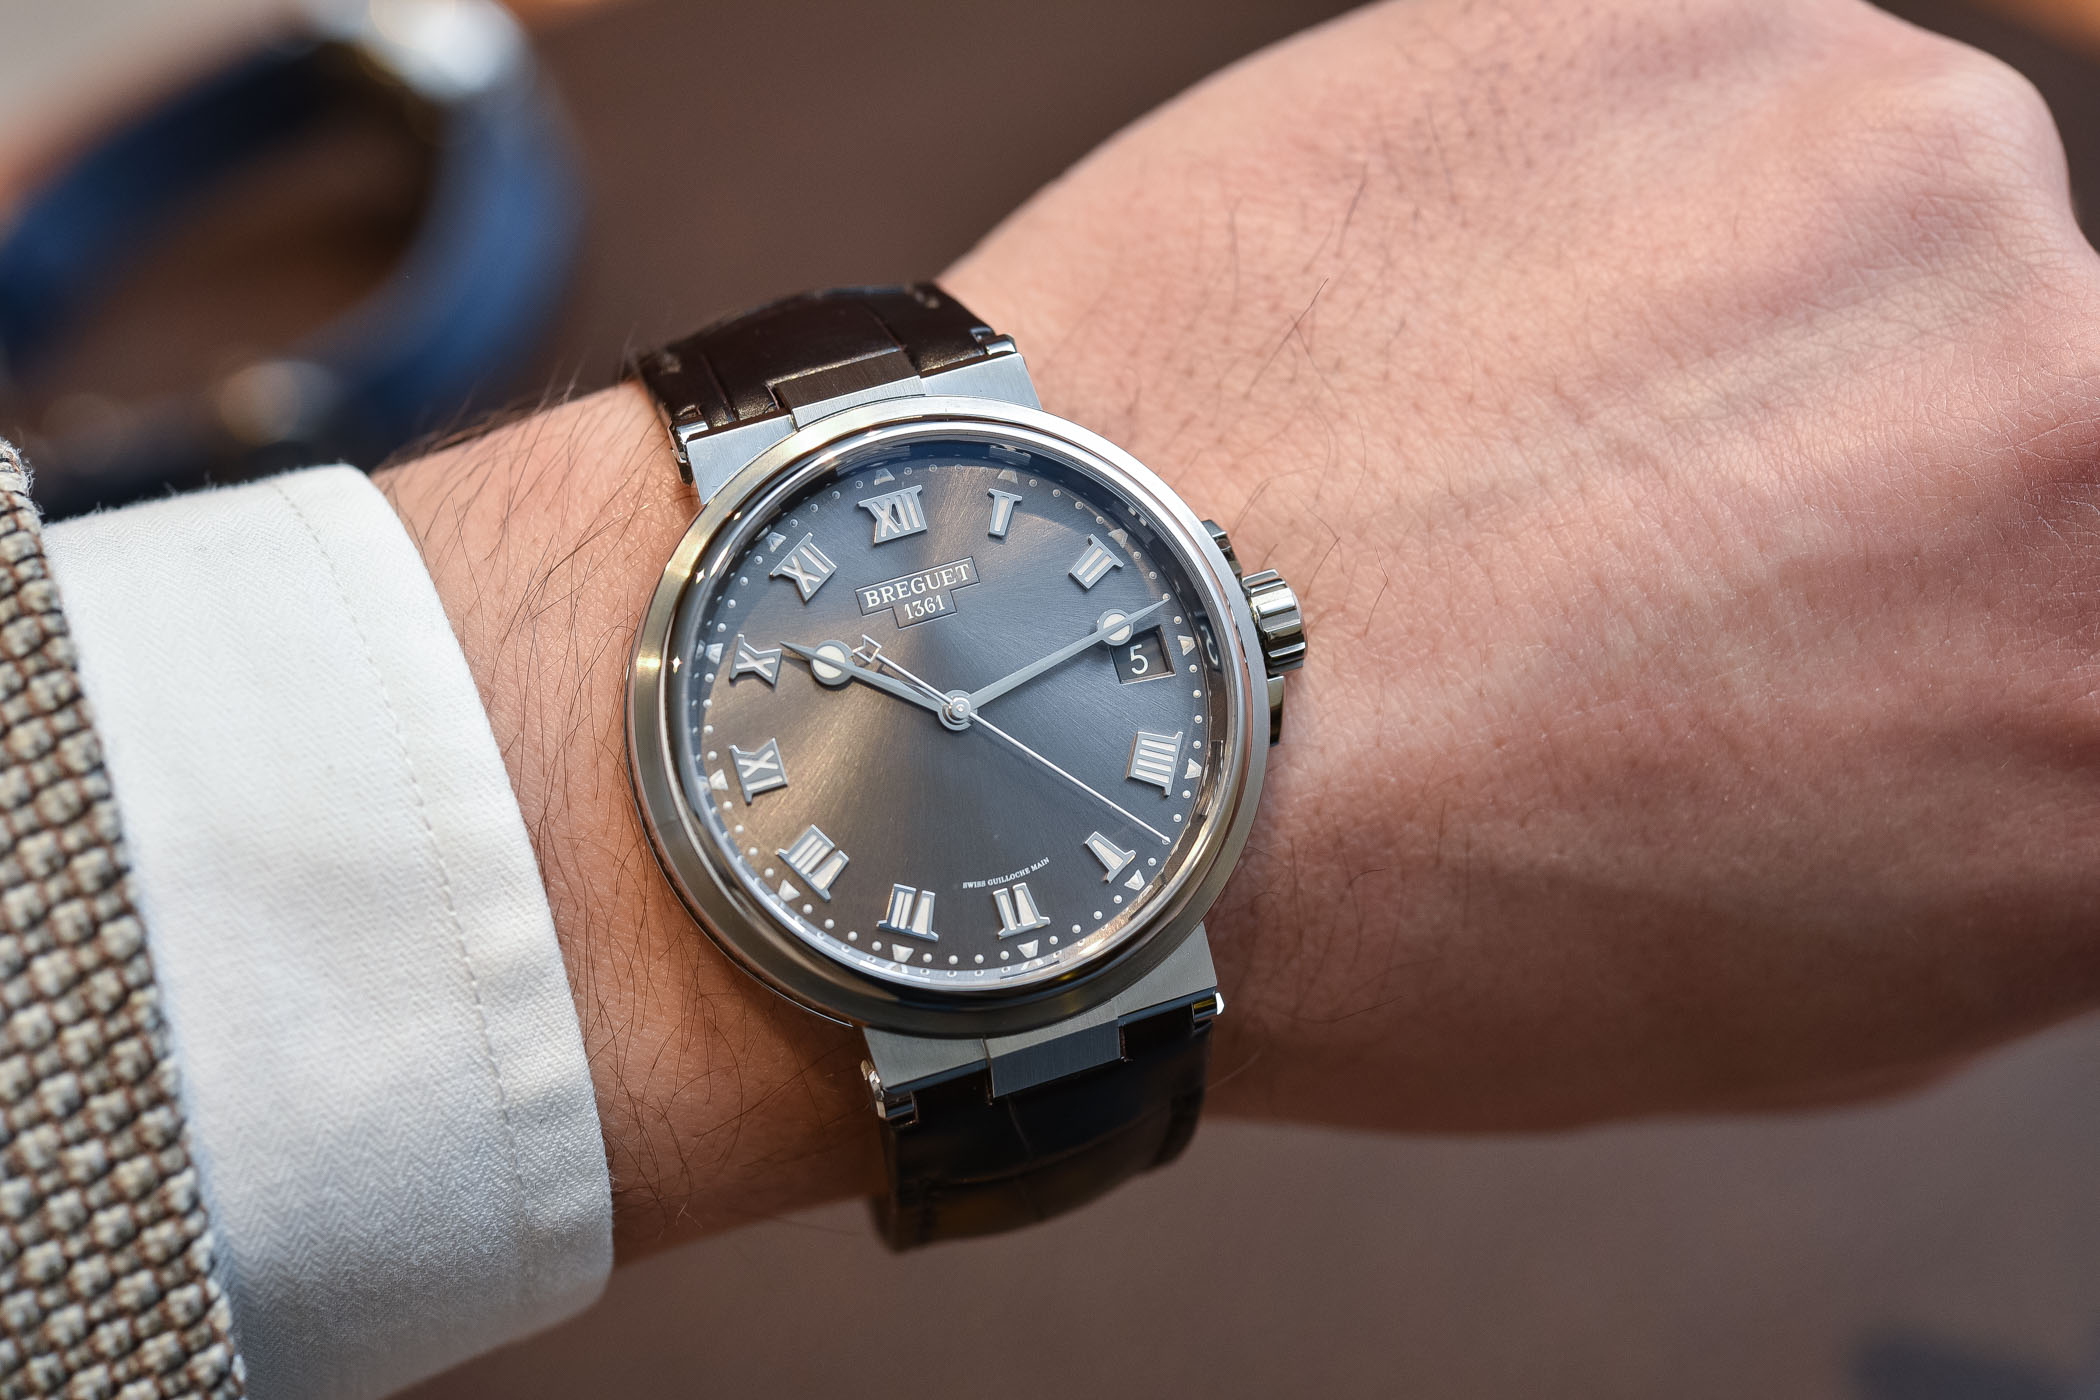 Breguet Marine 5517 Time-and-Date Baselworld 2018